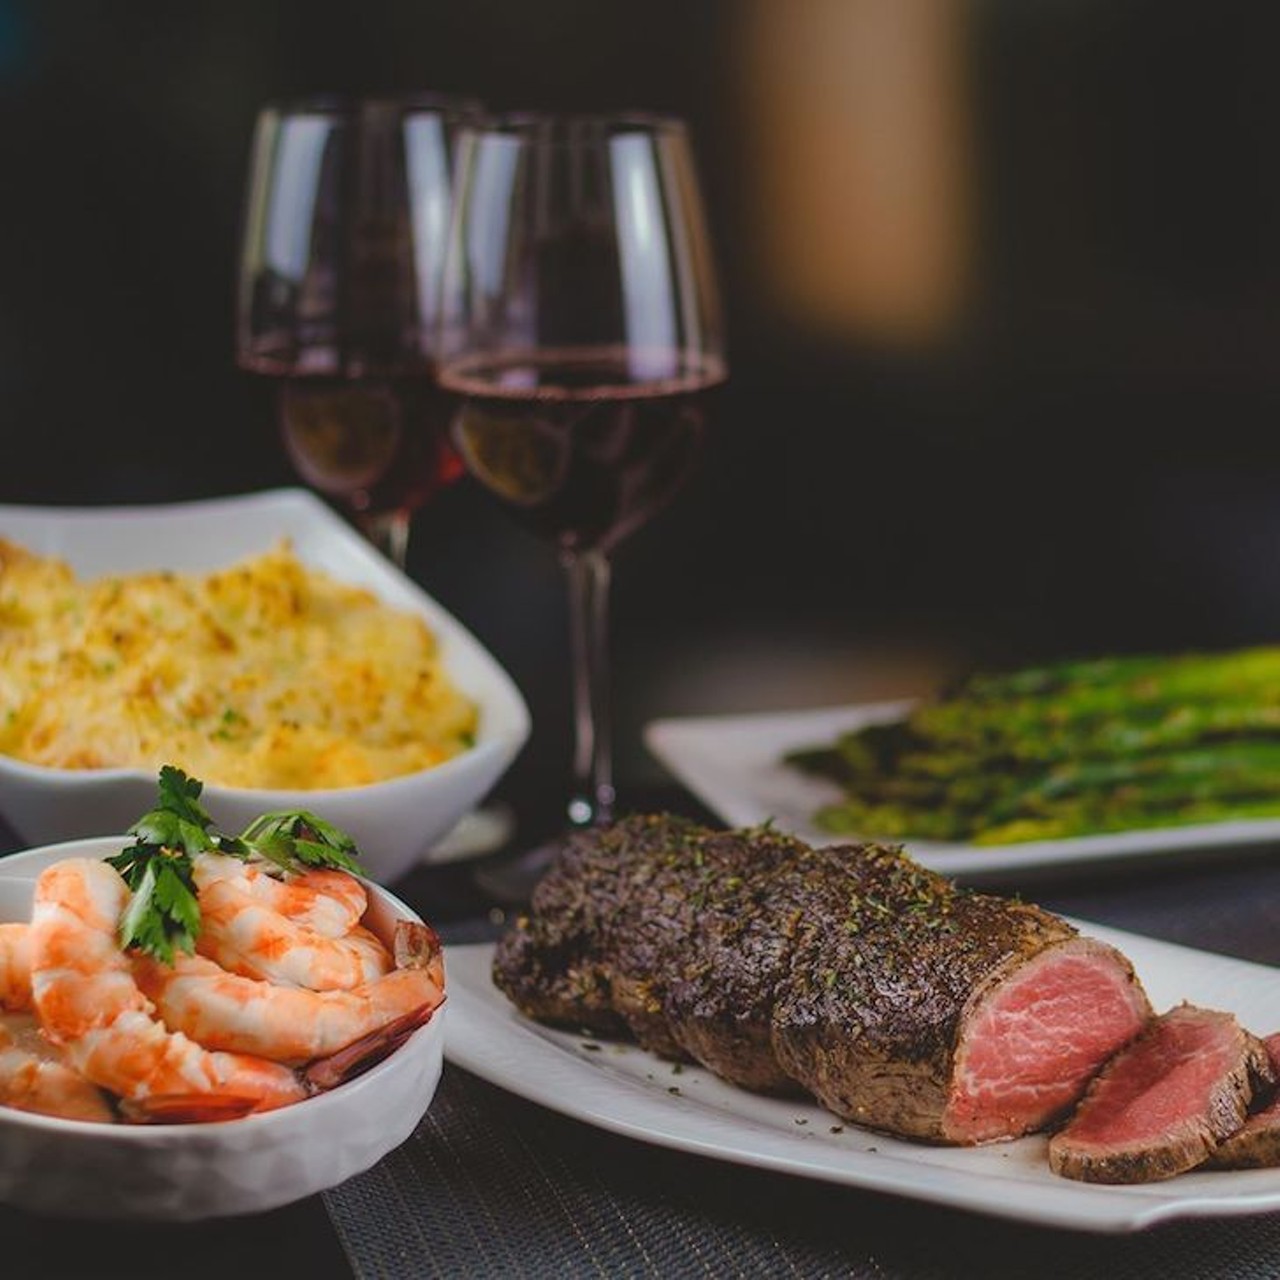 Eddie V&#146;s Prime Seafood 
7488 W. Sand Lake Road, 407-355-3011
Eddie V&#146;s has you covered with a four-course to-go menu, complete with a gift for Mom. Pre-order for curbside pickup the Friday or Saturday before. Order by phone.
Photo via Eddie V&#146;s Prime Seafood/Facebook